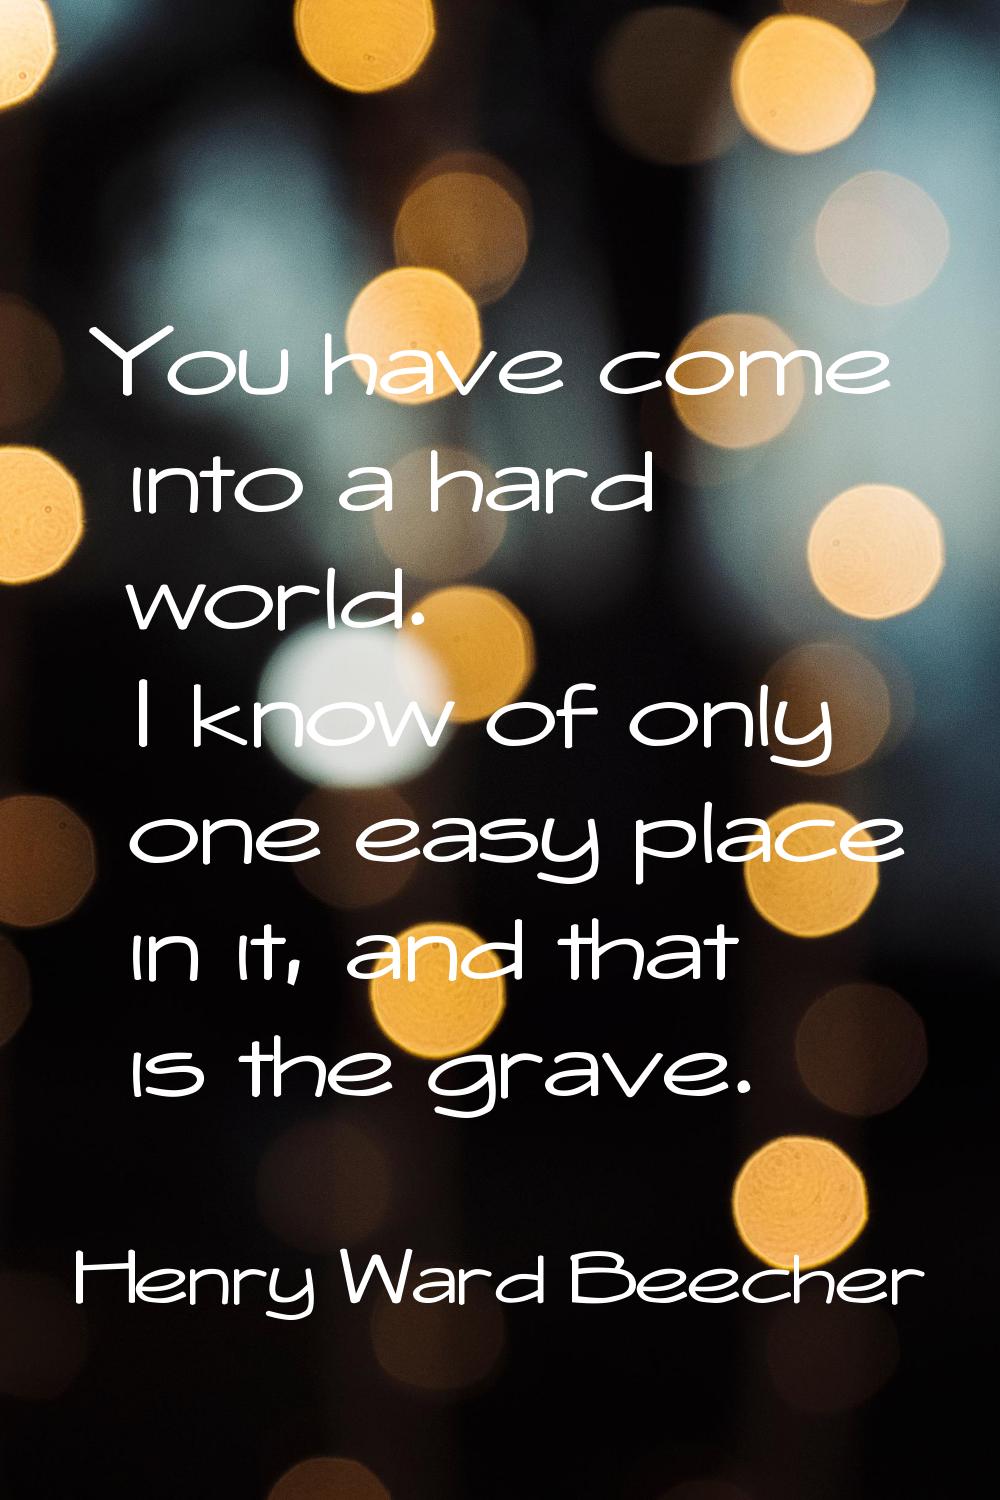 You have come into a hard world. I know of only one easy place in it, and that is the grave.